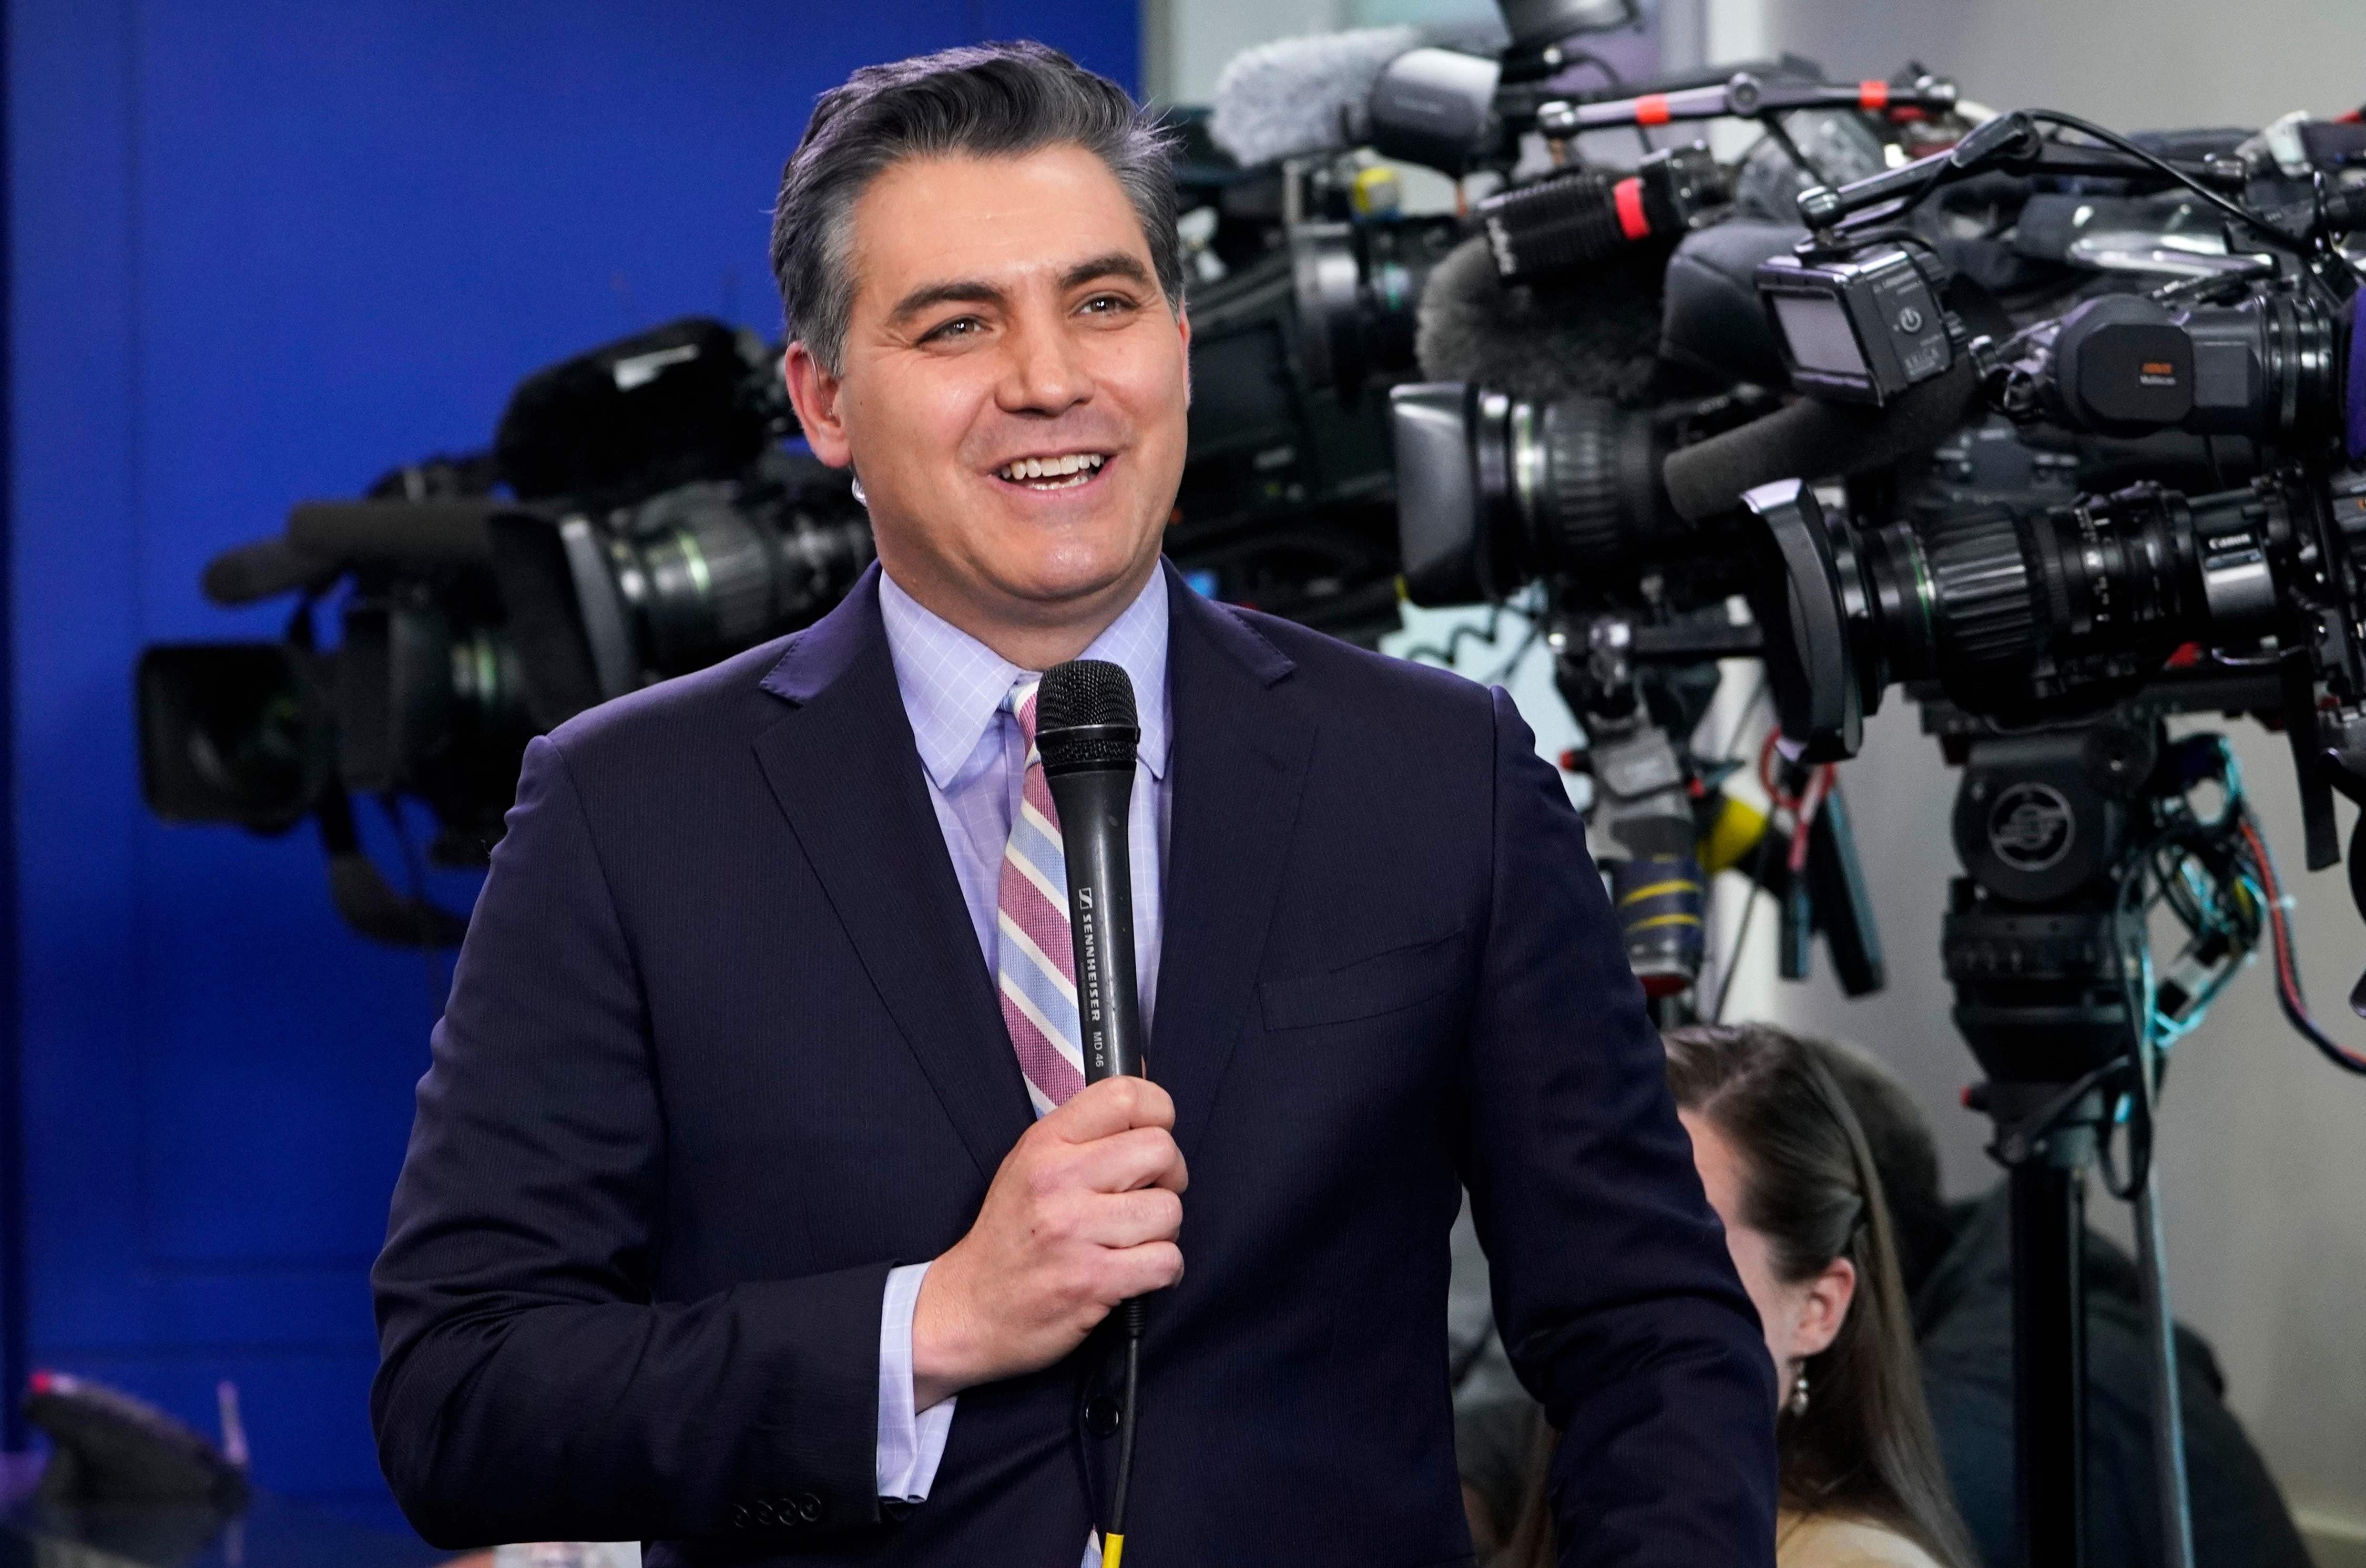 CNN’s chief White House correspondent Jim Acosta lacks access, at the moment, to the White House. Photo: AFP